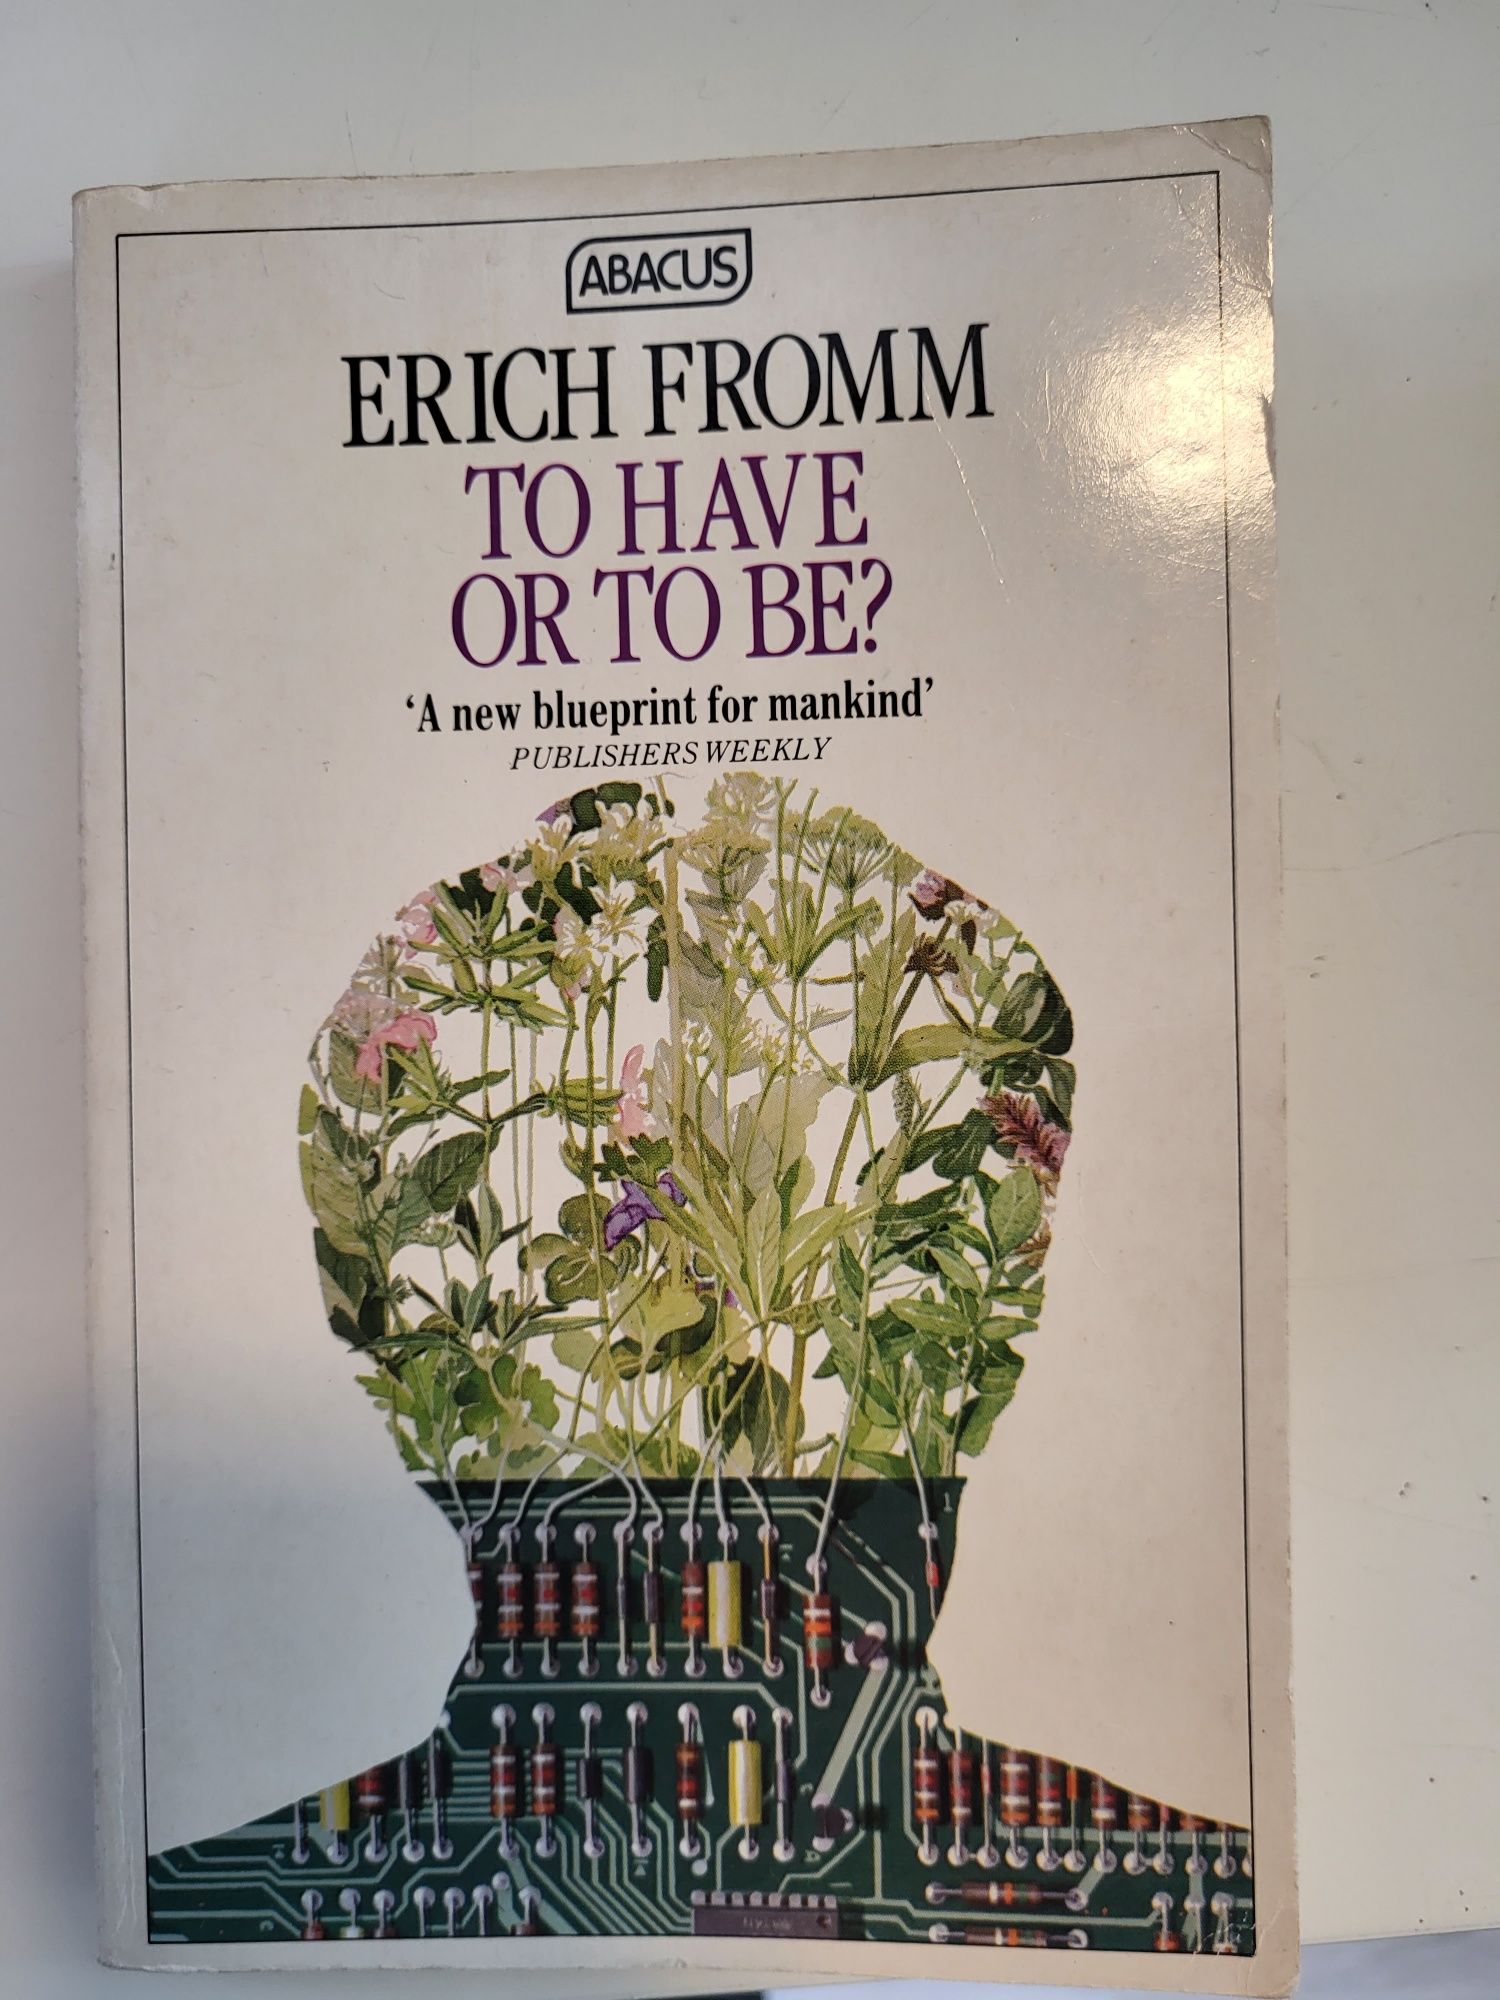 Erich Fromm to have or to be